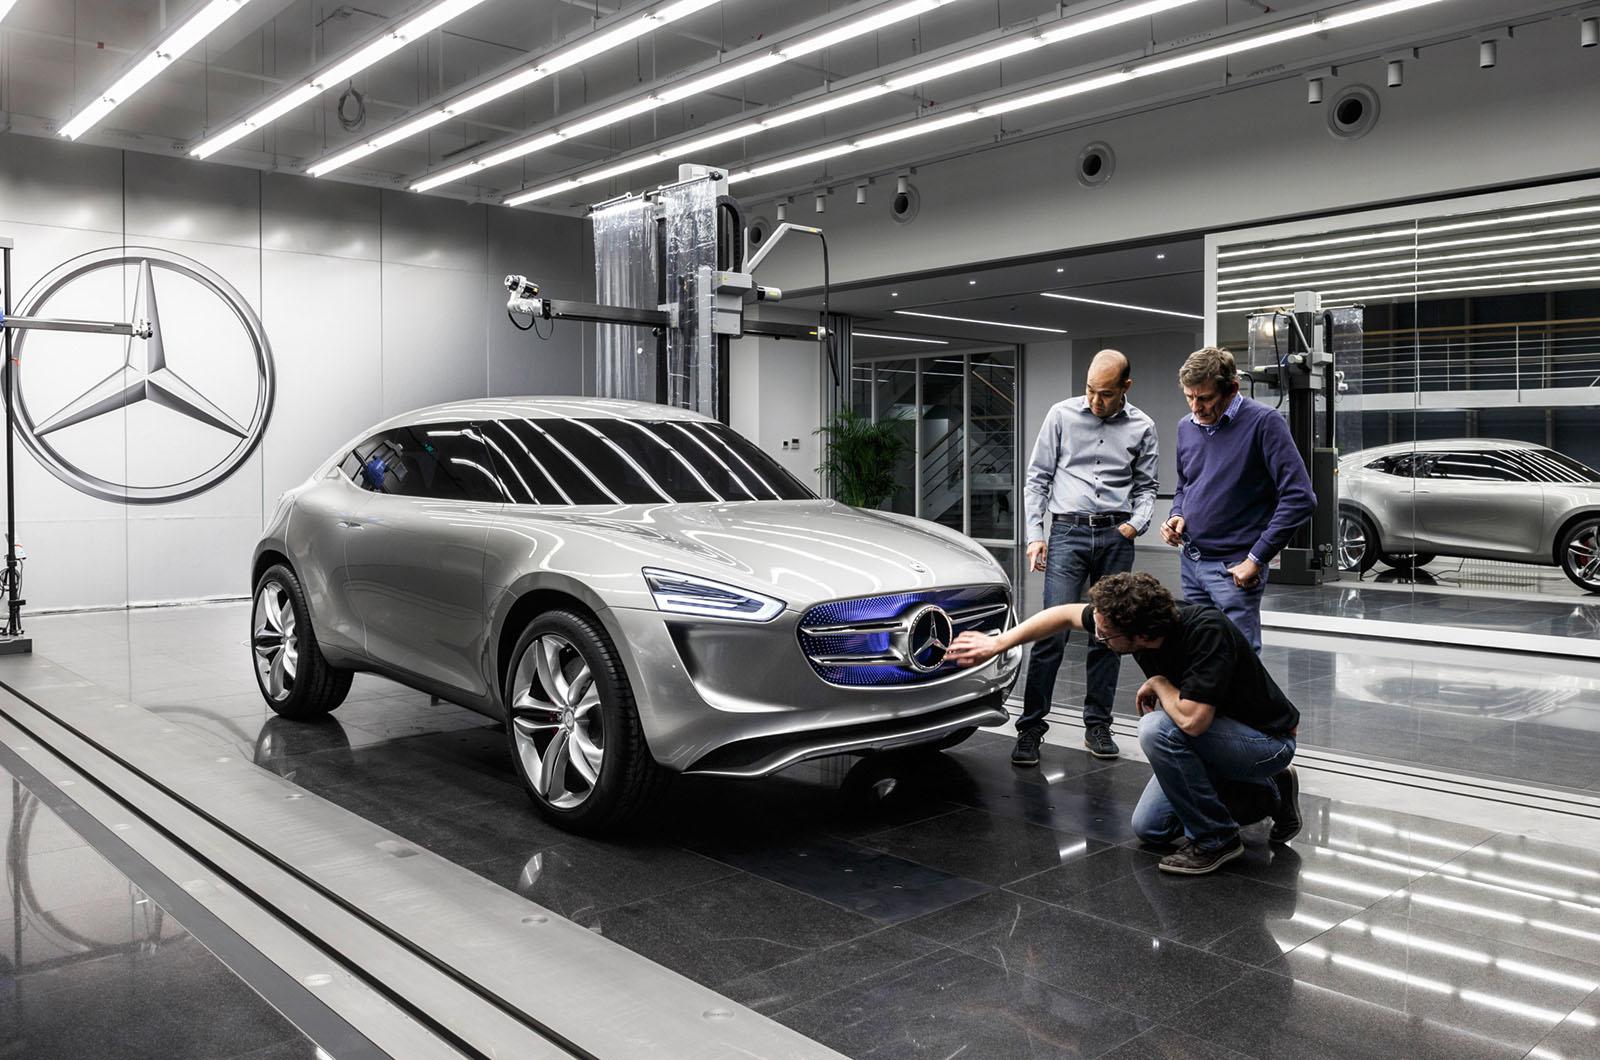 Mercedes-Benz will only produce electric vehicles from 2025